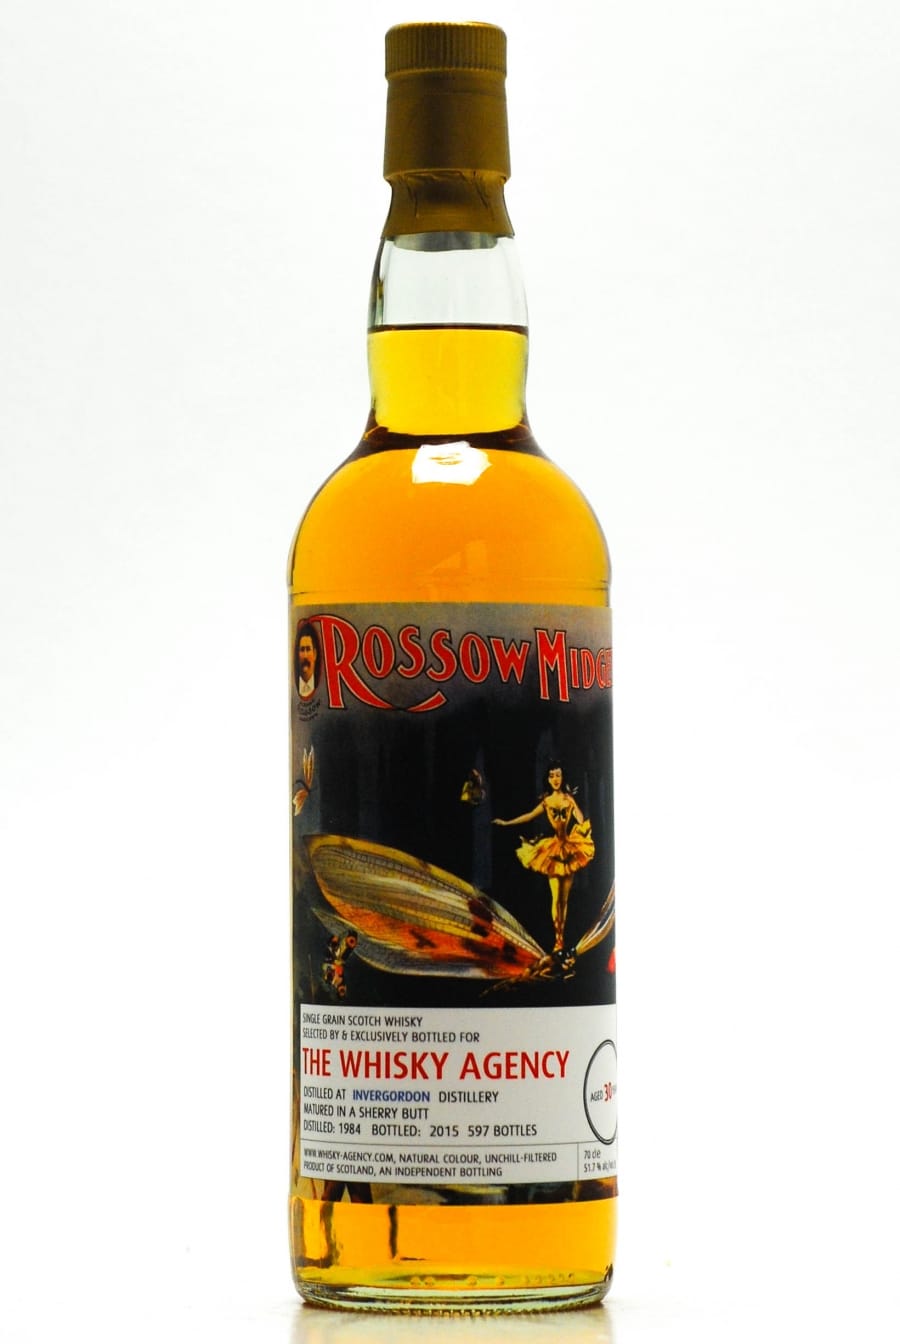 Invergordon - 30 Years Old The Whisky Agency Circus Joint bottling with The Nectar 51,7% 1984